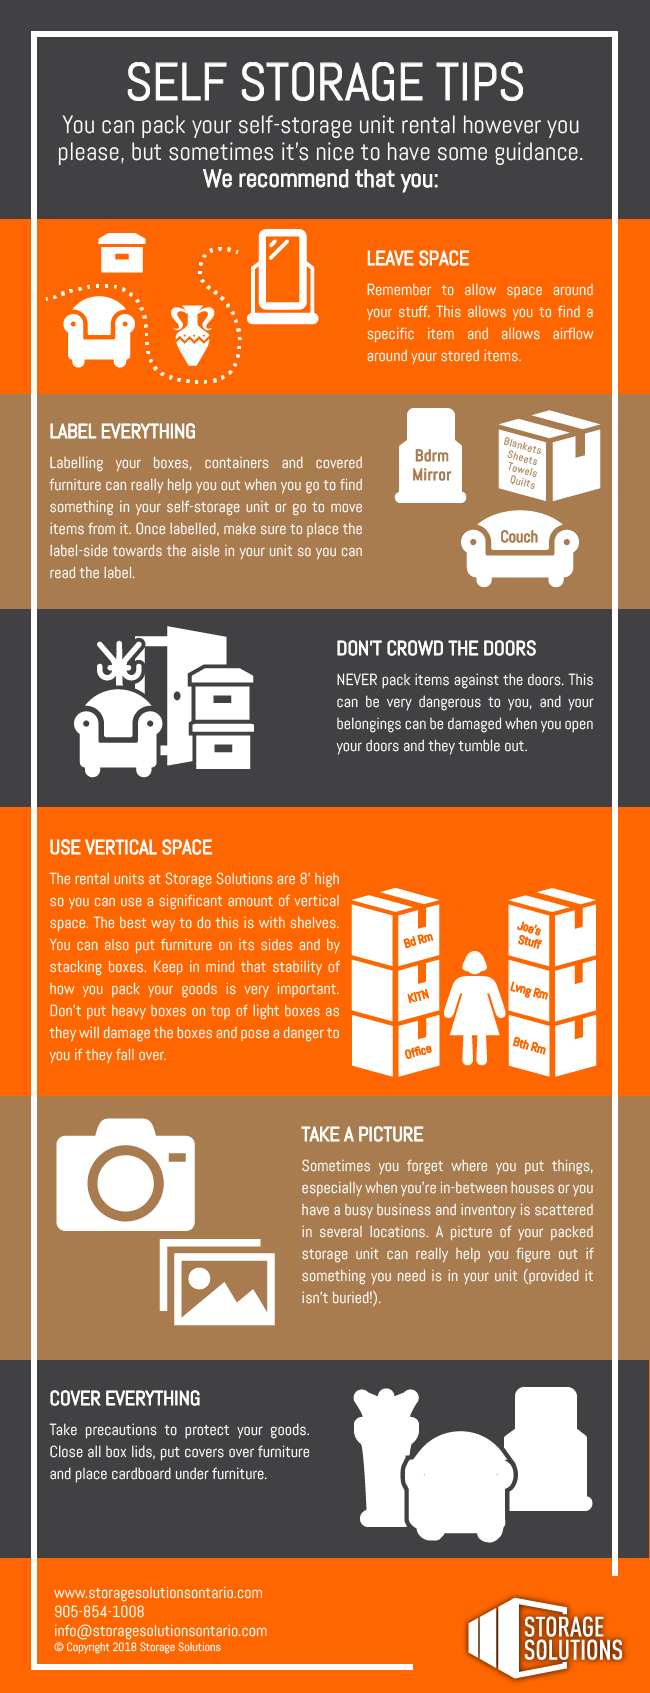 An infographic that visually shows self-storage tips